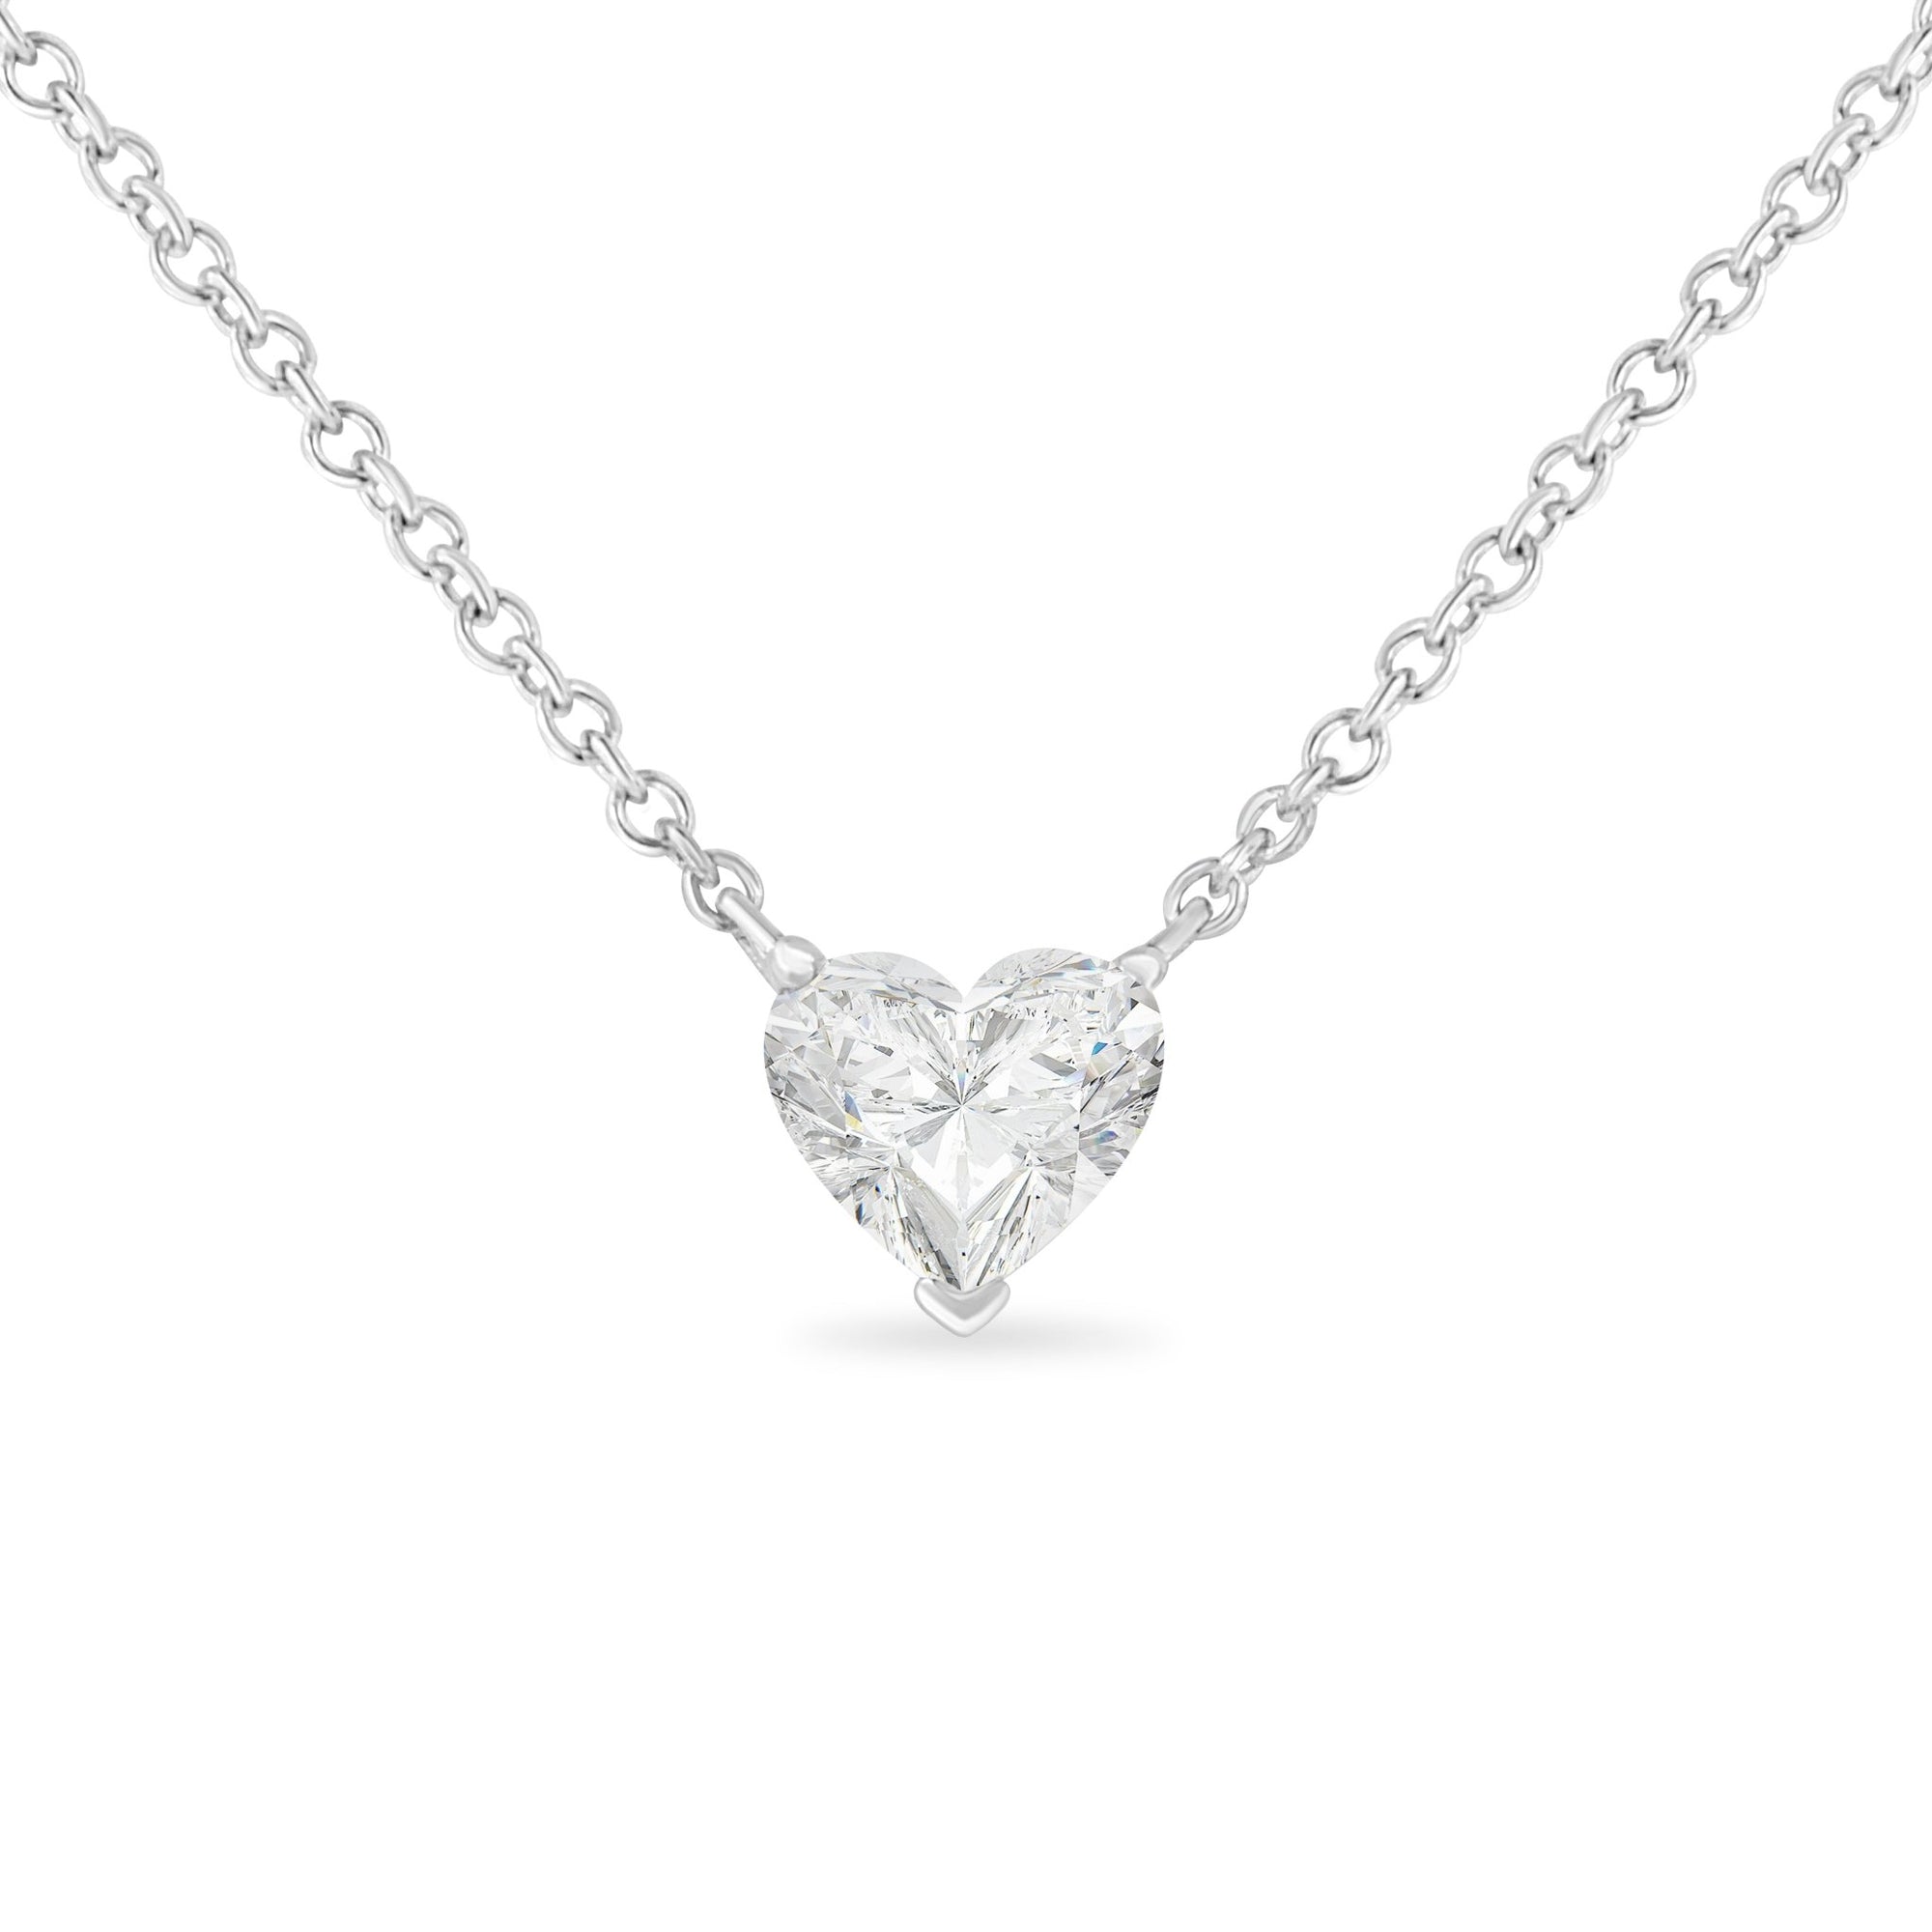 14k White Gold 1/4 Cttw Lab Grown Heart Shape Diamond Solitaire 18" Pendant Necklace (E-F Color, SI1-SI2 Clarity) - LinkagejewelrydesignLinkagejewelrydesign